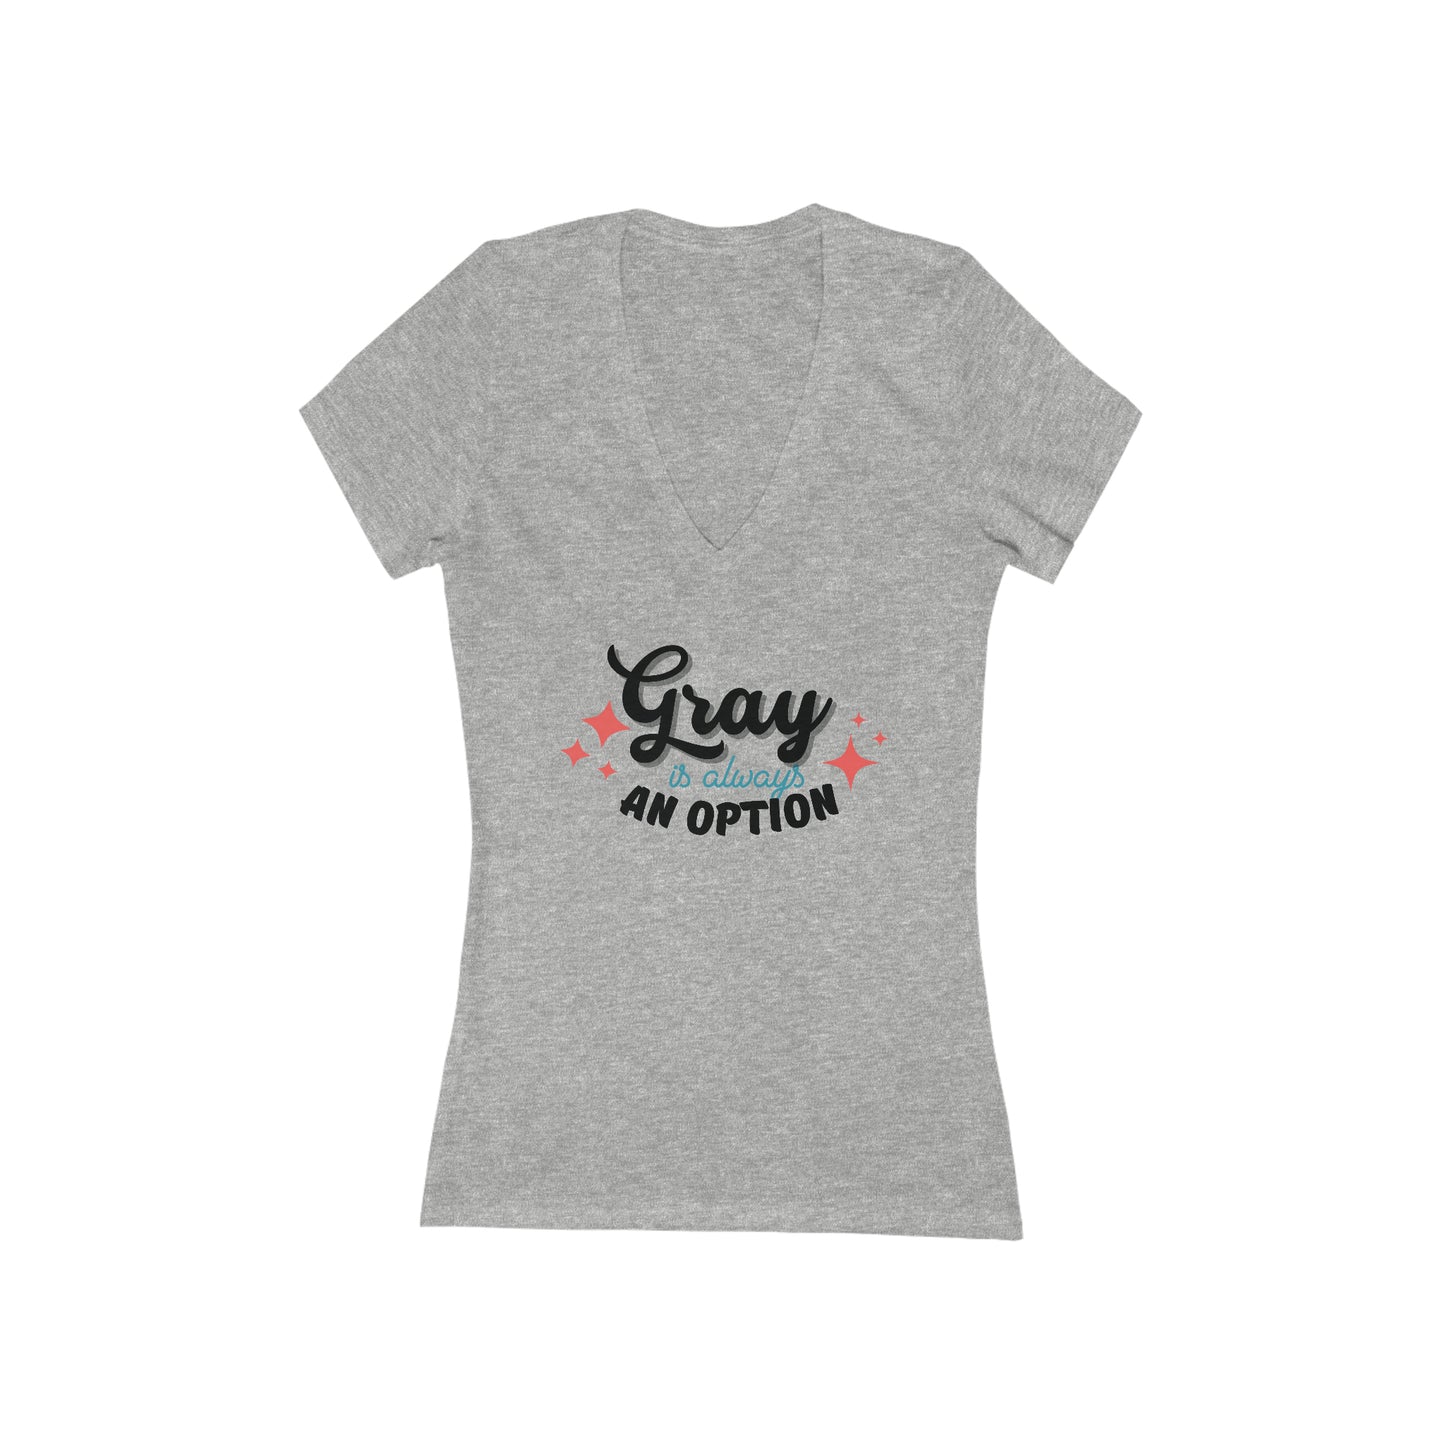 Gray is Always an Option COLOR, short sleeve deep v-neck t-shirt, for women embracing silver and gray hair